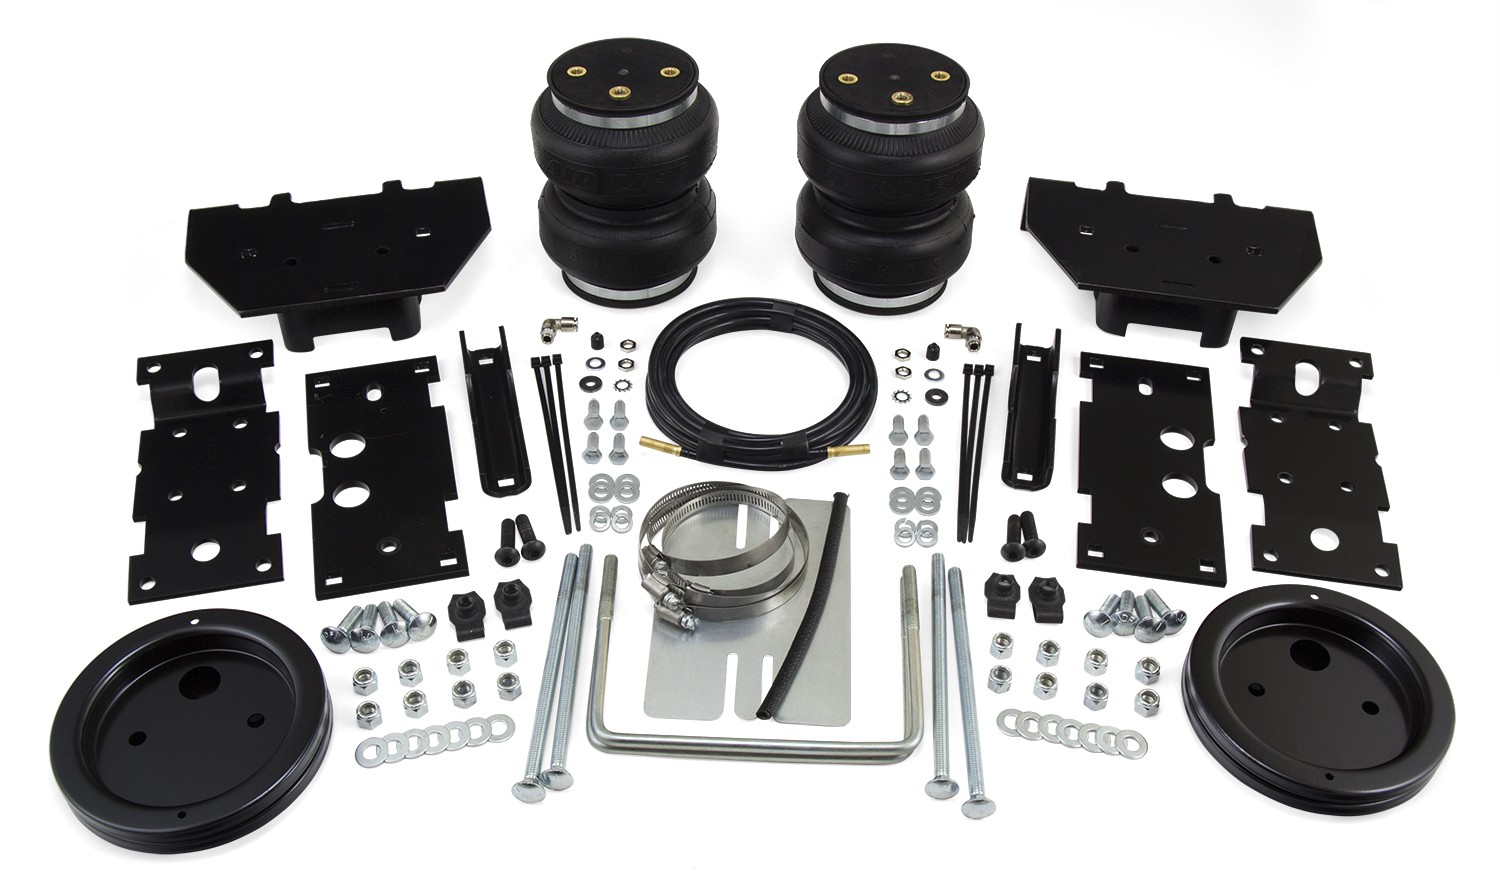 Air Lift 88391 LoadLifter 5000 ULTIMATE with internal jounce bumper; Leaf spring air spring kit